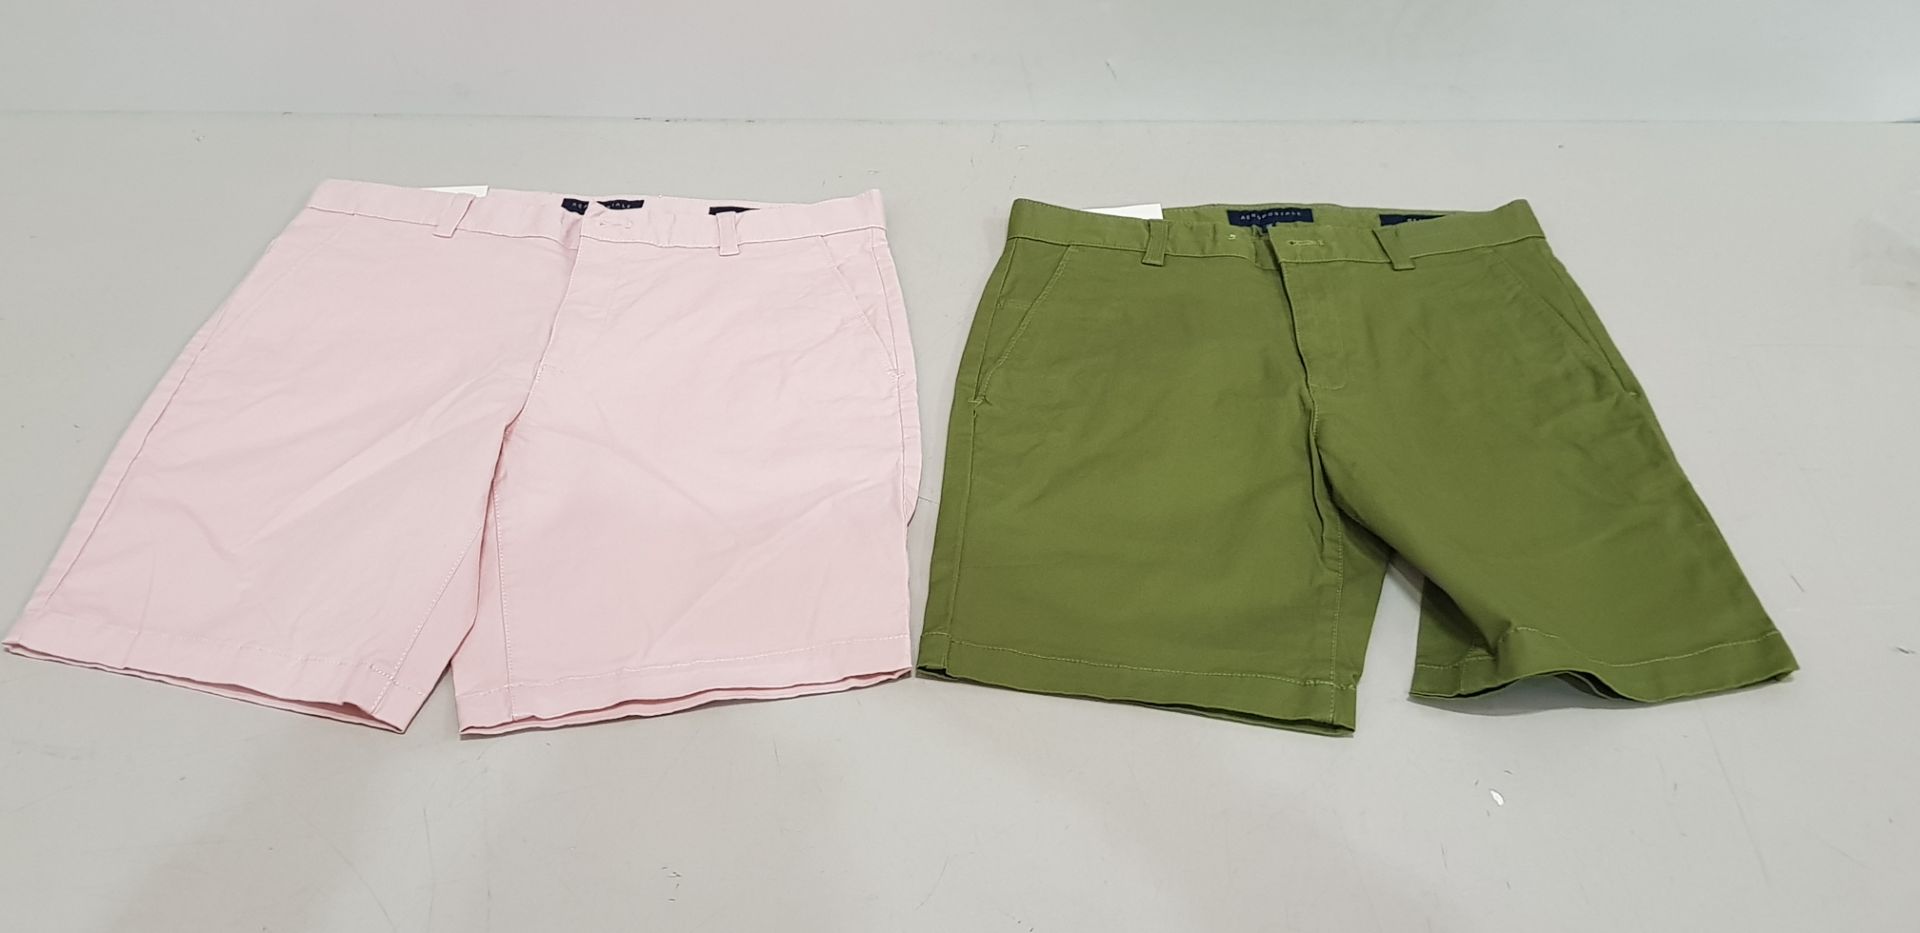 29 X BRAND NEW MIXED AEROPOSTALE MENS KHAKI CHINO SHORTS AND PINK CHINO SHORTS IN MIXED SIZES FROM